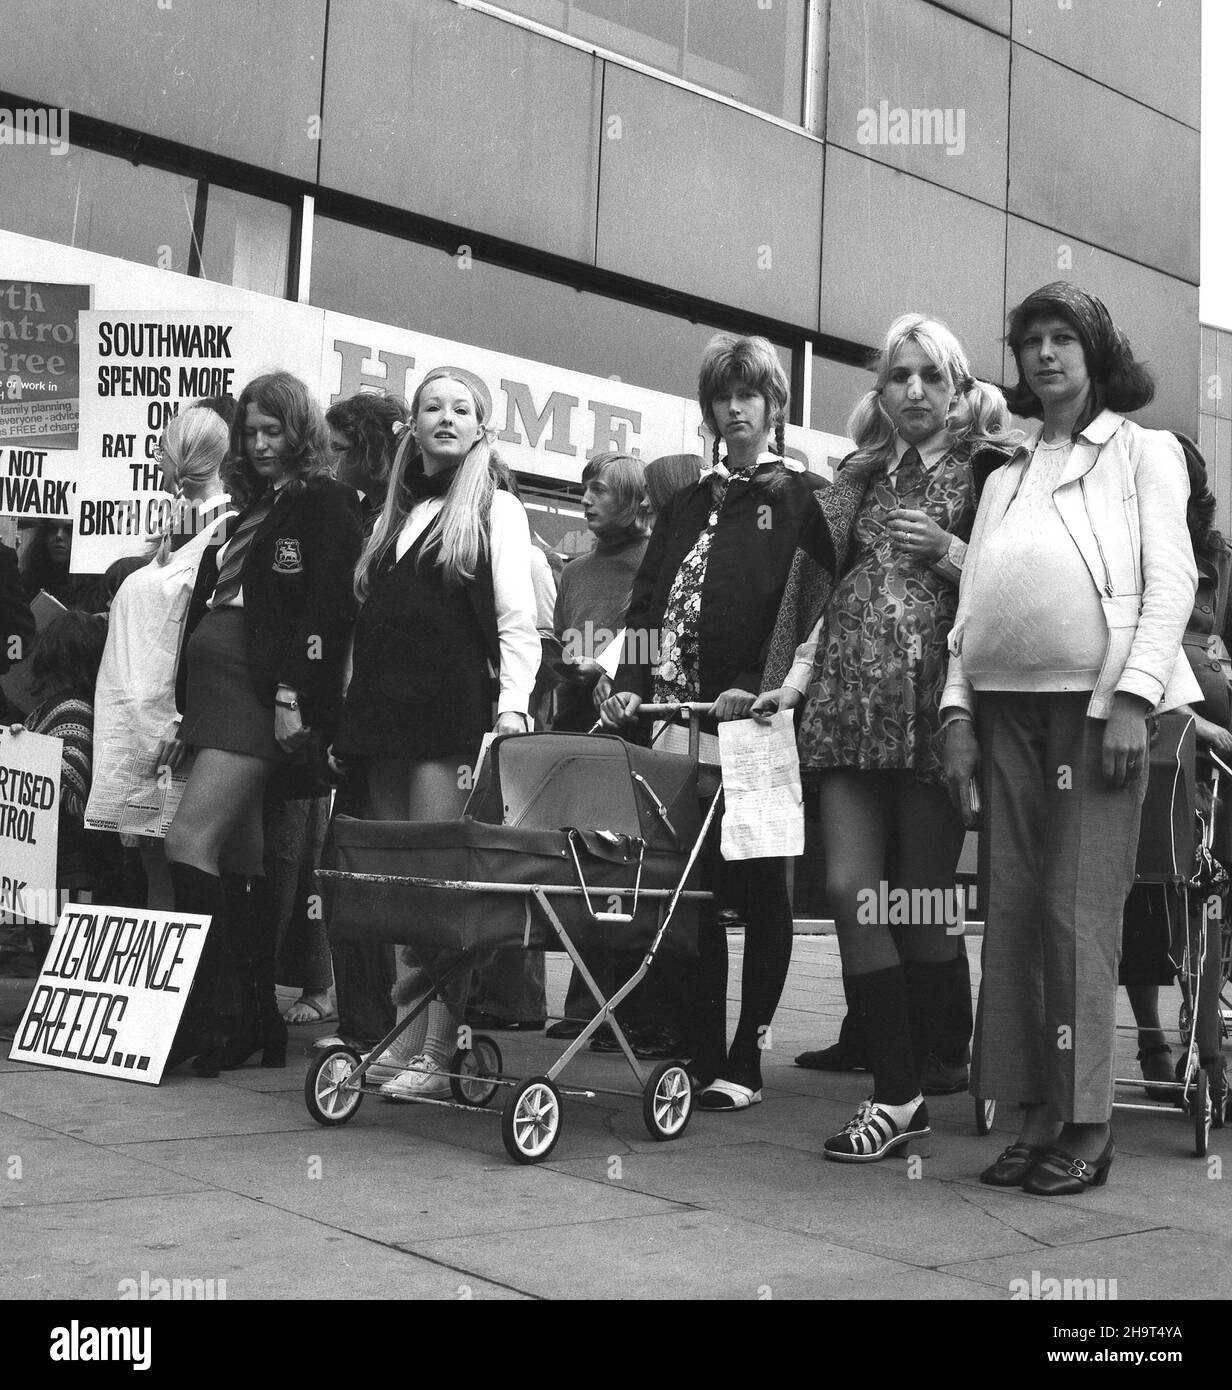 1970s, historical, group of people, with banners and placards, making a protest outside a shopping centre about the failure of Southwark Council, South London, to offer free birth control and contraception. A poster reads, 'Southwark Spends More on Rat Control Than Birth Control'. The ability of unmarried young  women to access contraception and prevent unwanted pregancies remained limited in parts of Britain until the end of the 1970s. Stock Photo